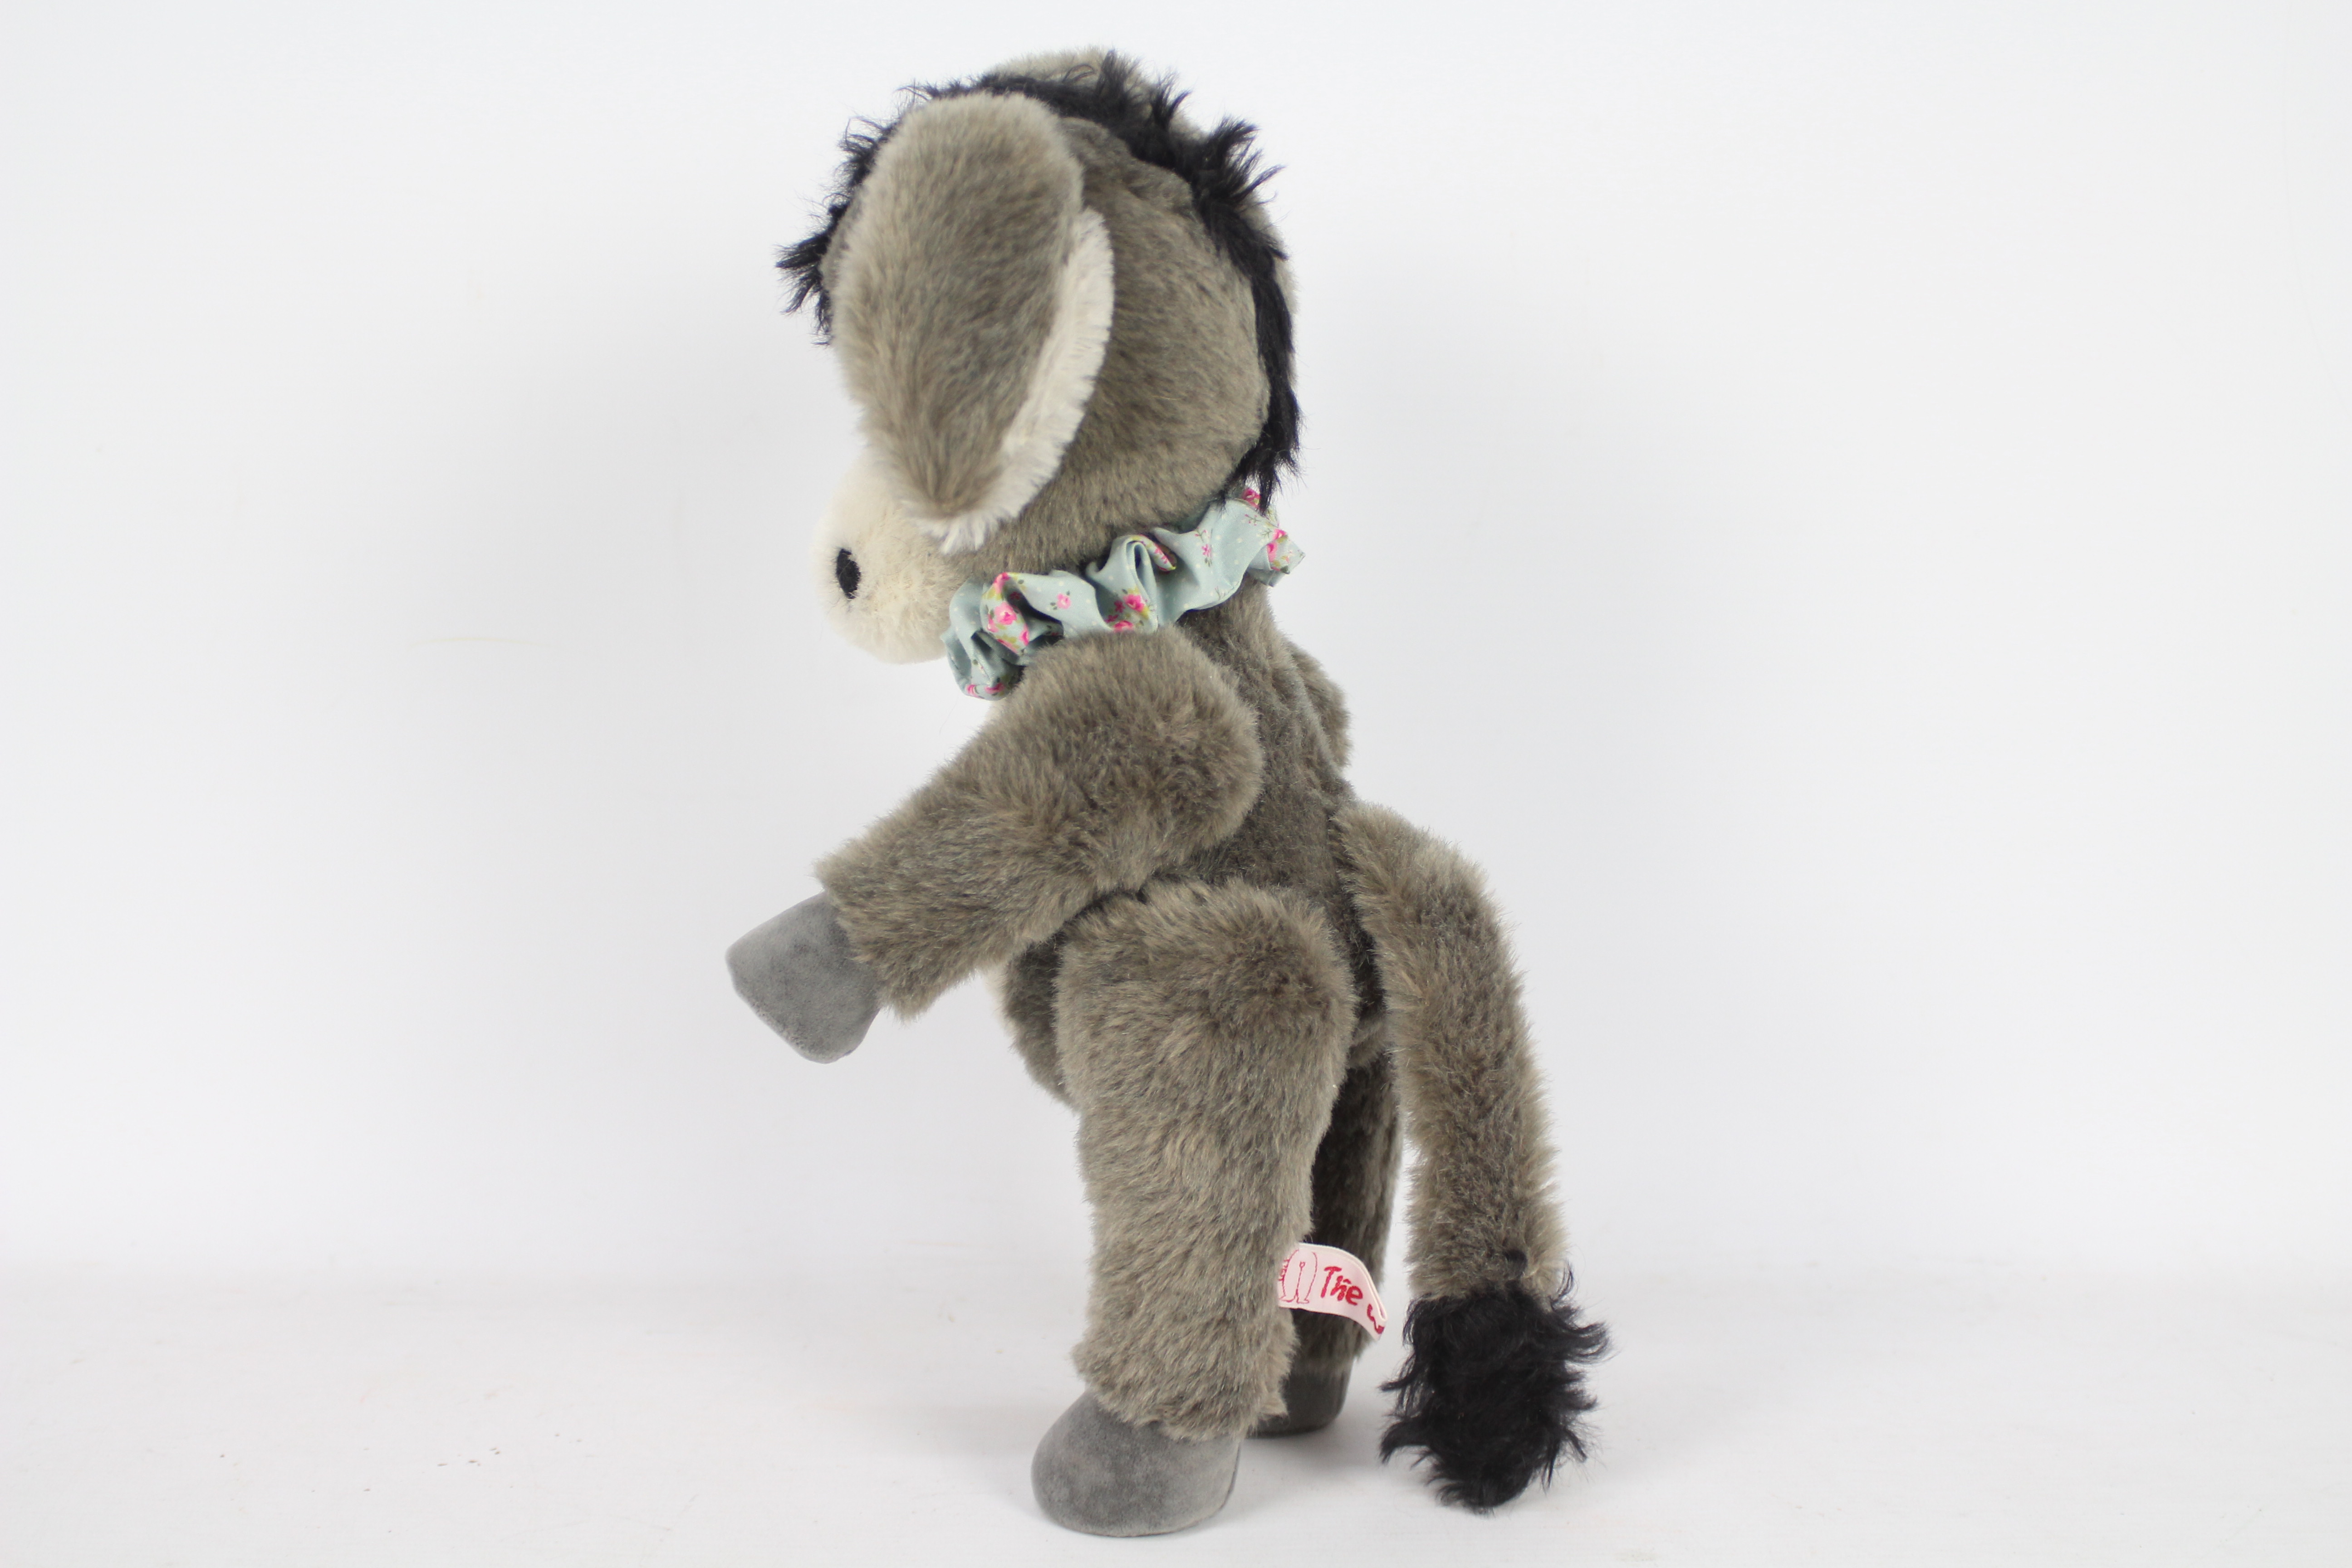 The Wild Things - A grey and black-coloured soft toy donkey. Donkey has glass eyes. - Image 4 of 7